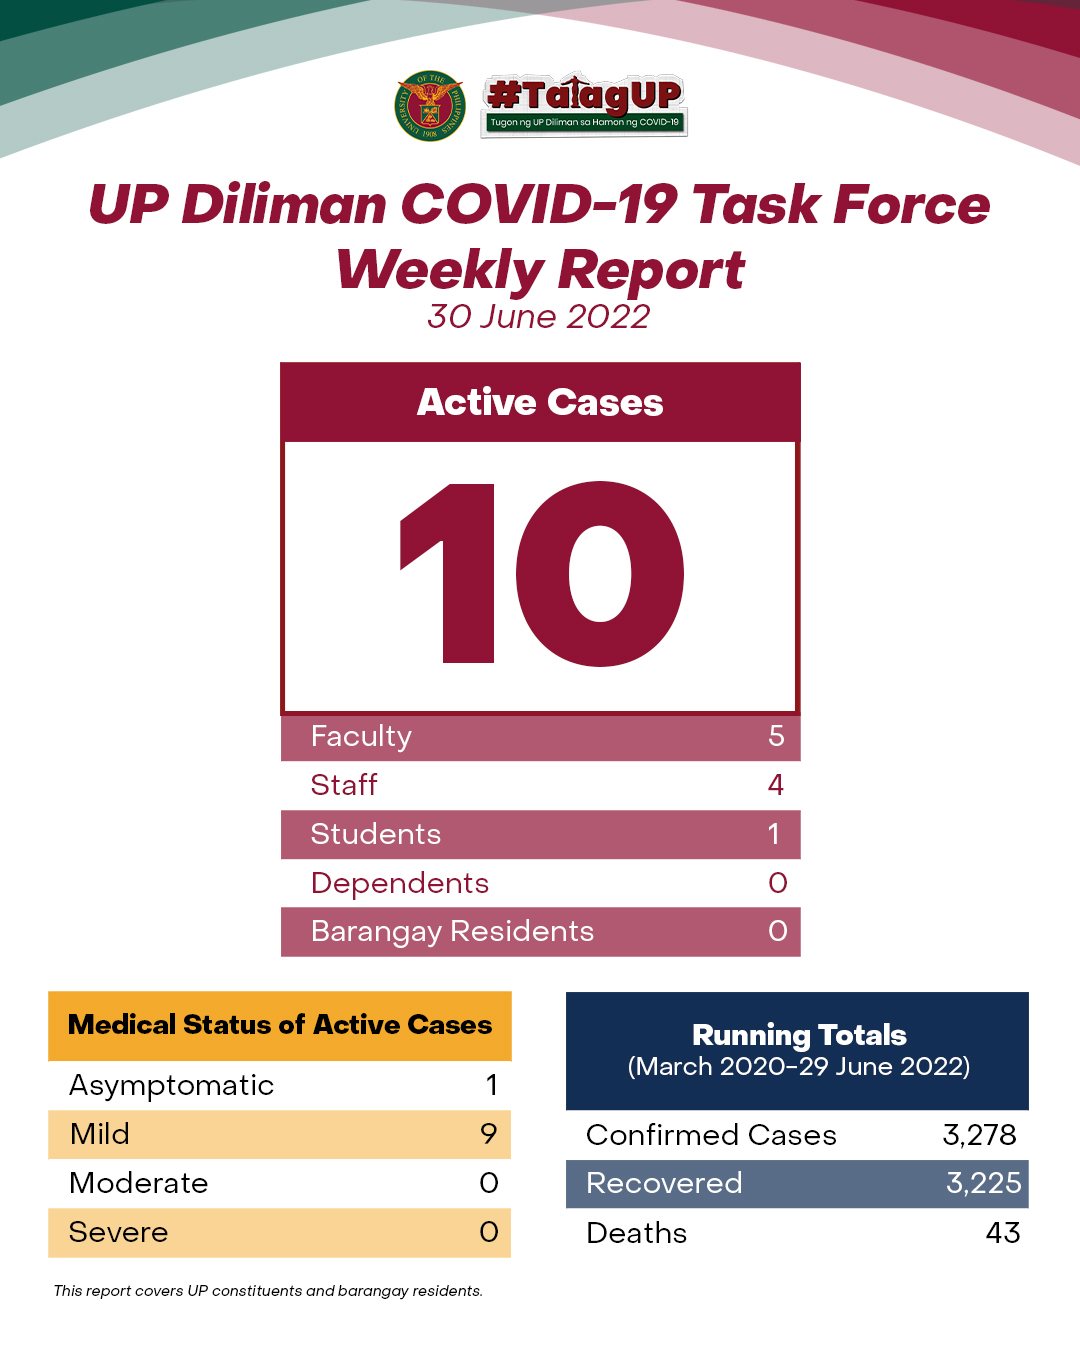 UP Diliman COVID-19 Task Force Weekly Report (30 June 2022)